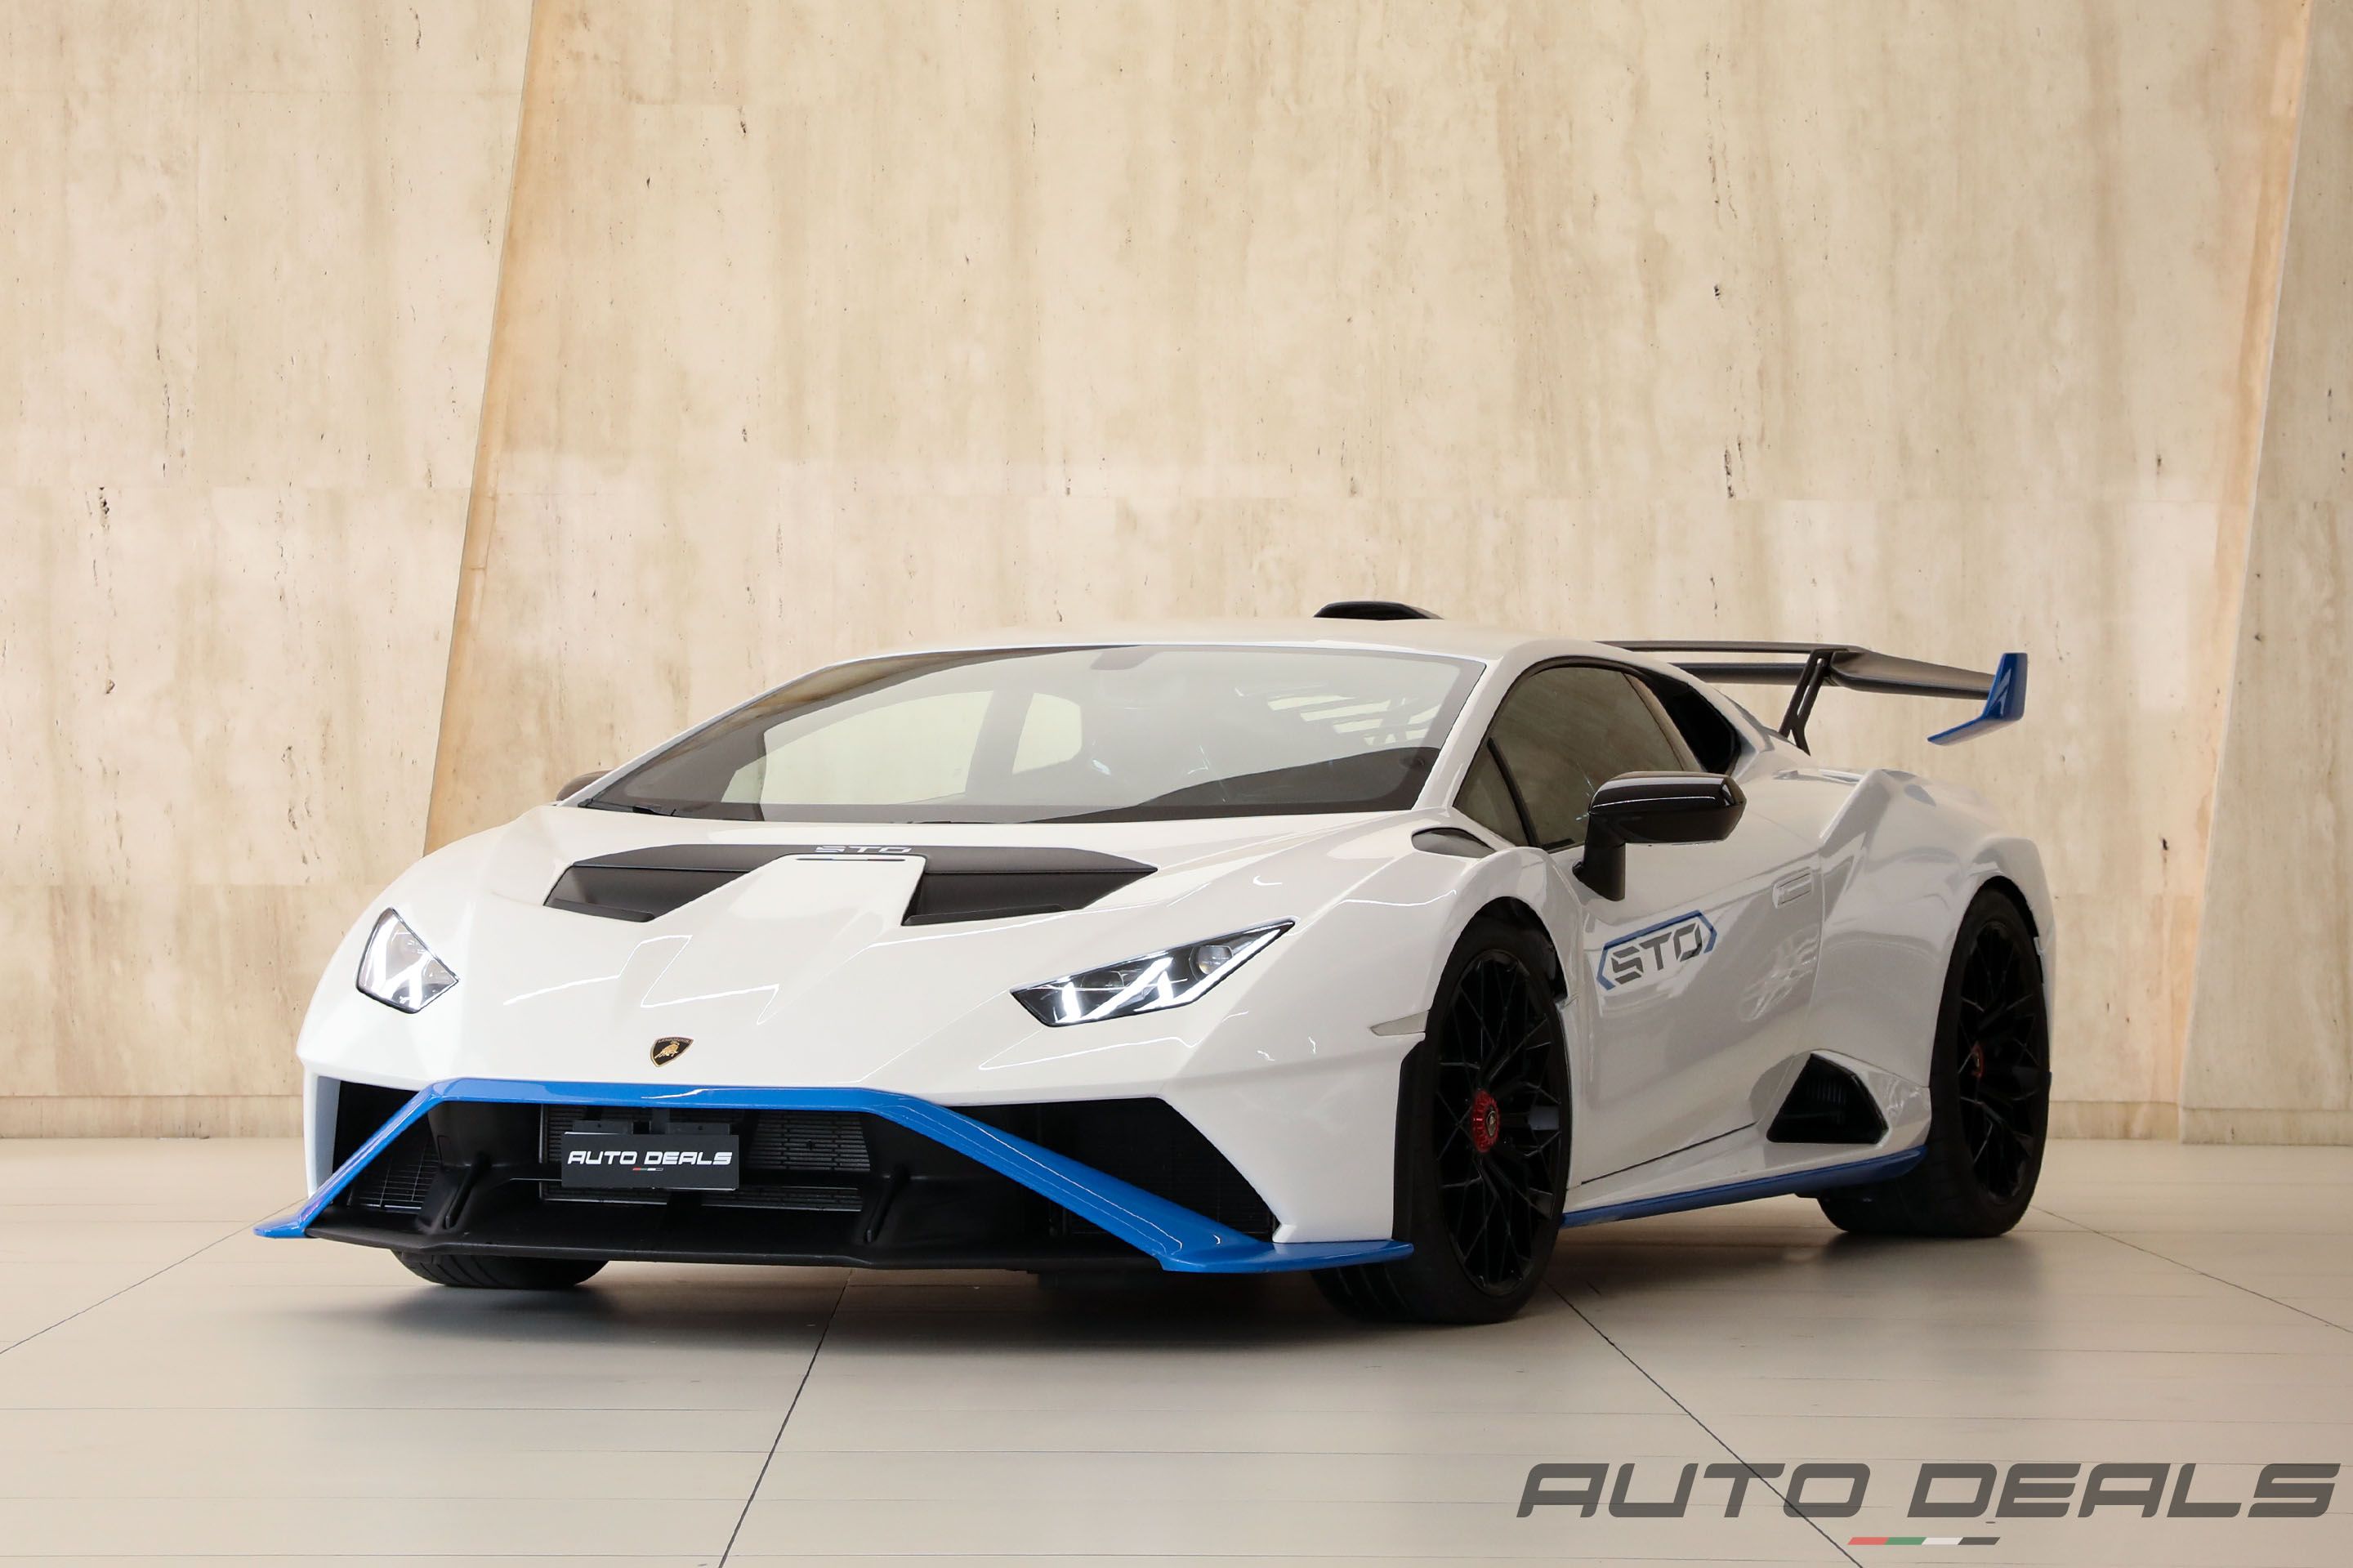 Lamborghini Huracan STO | 2022 - Extremely Low Mileage - Top of the Line - Excellent Condition | 5.2L V10